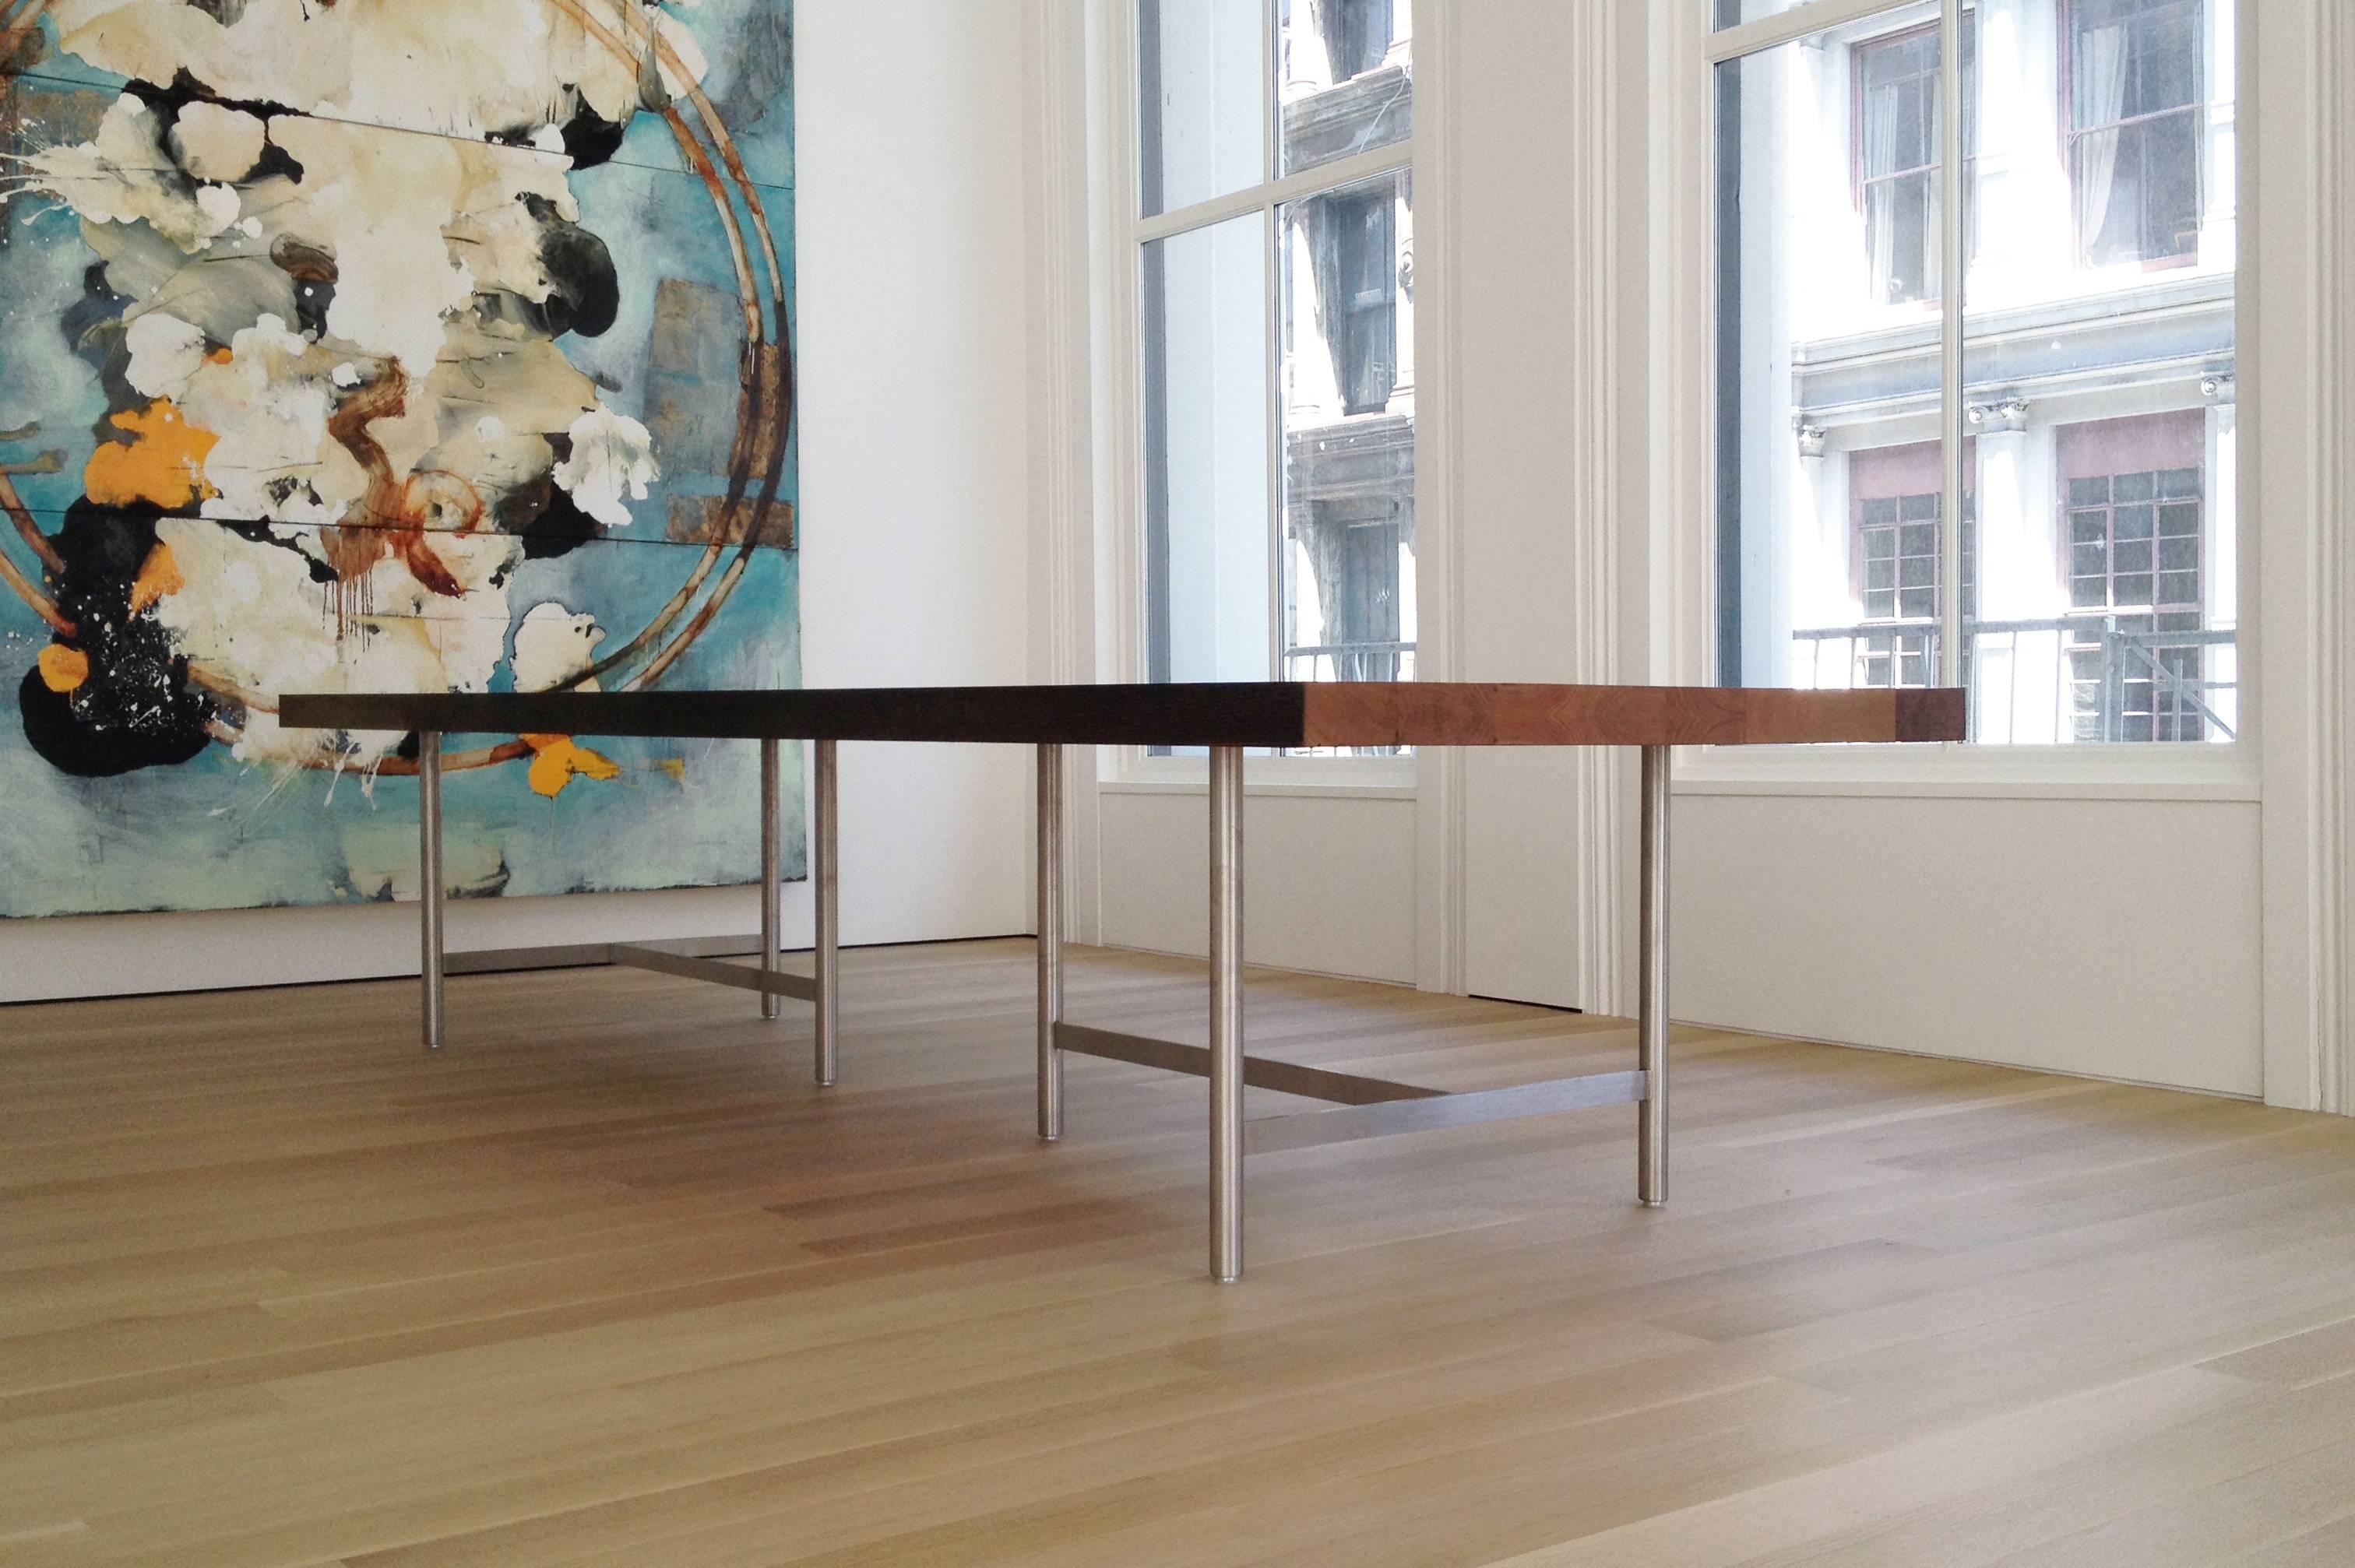 The Soho dining table considers the tension between contemporary materials. Stout reclaimed chestnut timbers provide richness and warmth; a distinct contrast to the bright, brushed stainless steel legs below. Finished with hand rubbed oil and wax